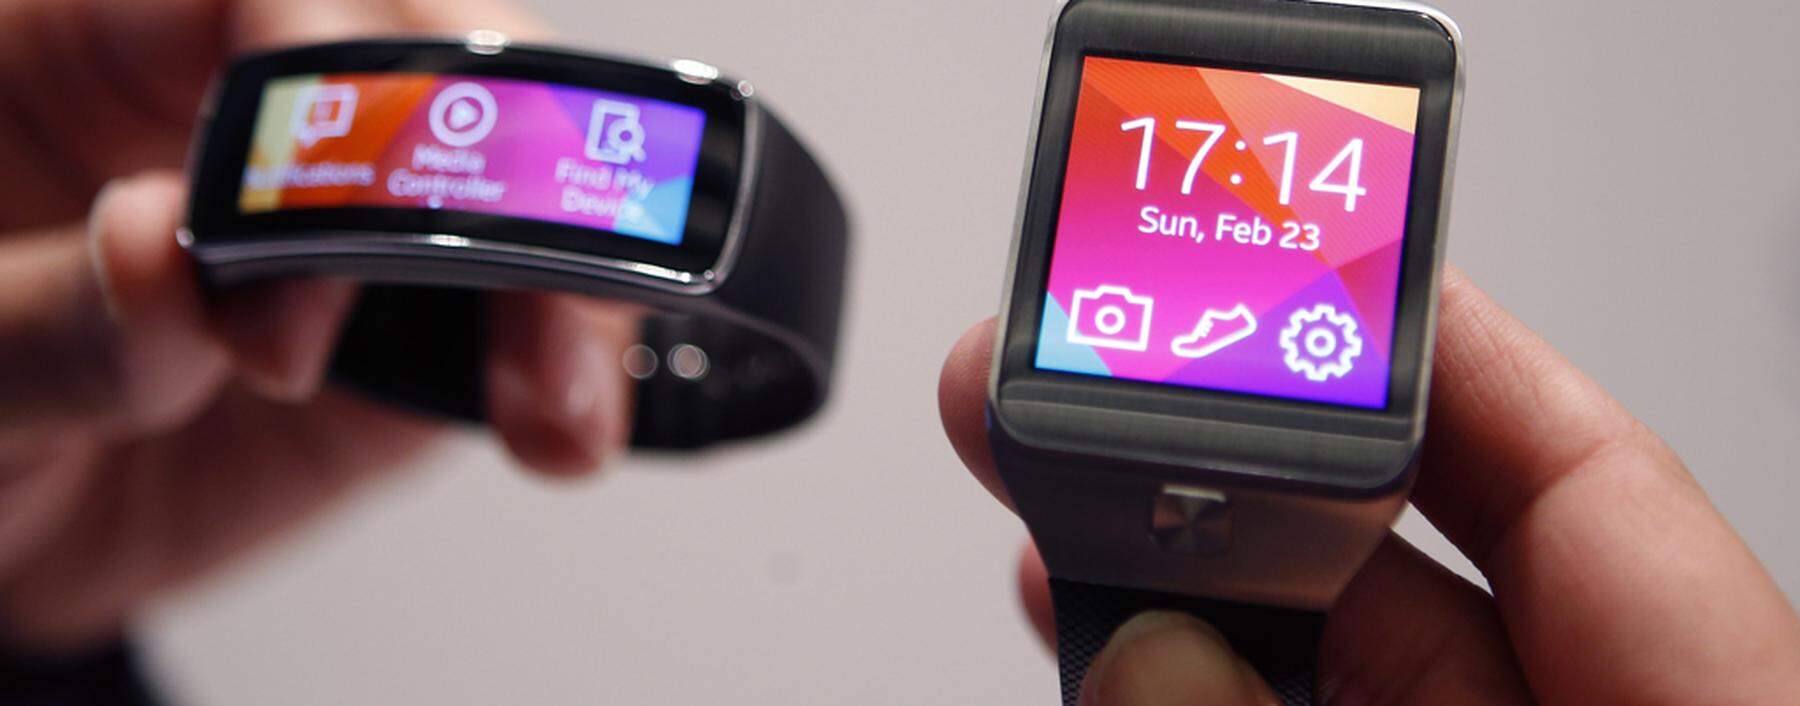 New Samsung Gear 2 smartwatch and Gear Fit fitness band are displayed at the Mobile World Congress in Barcelona